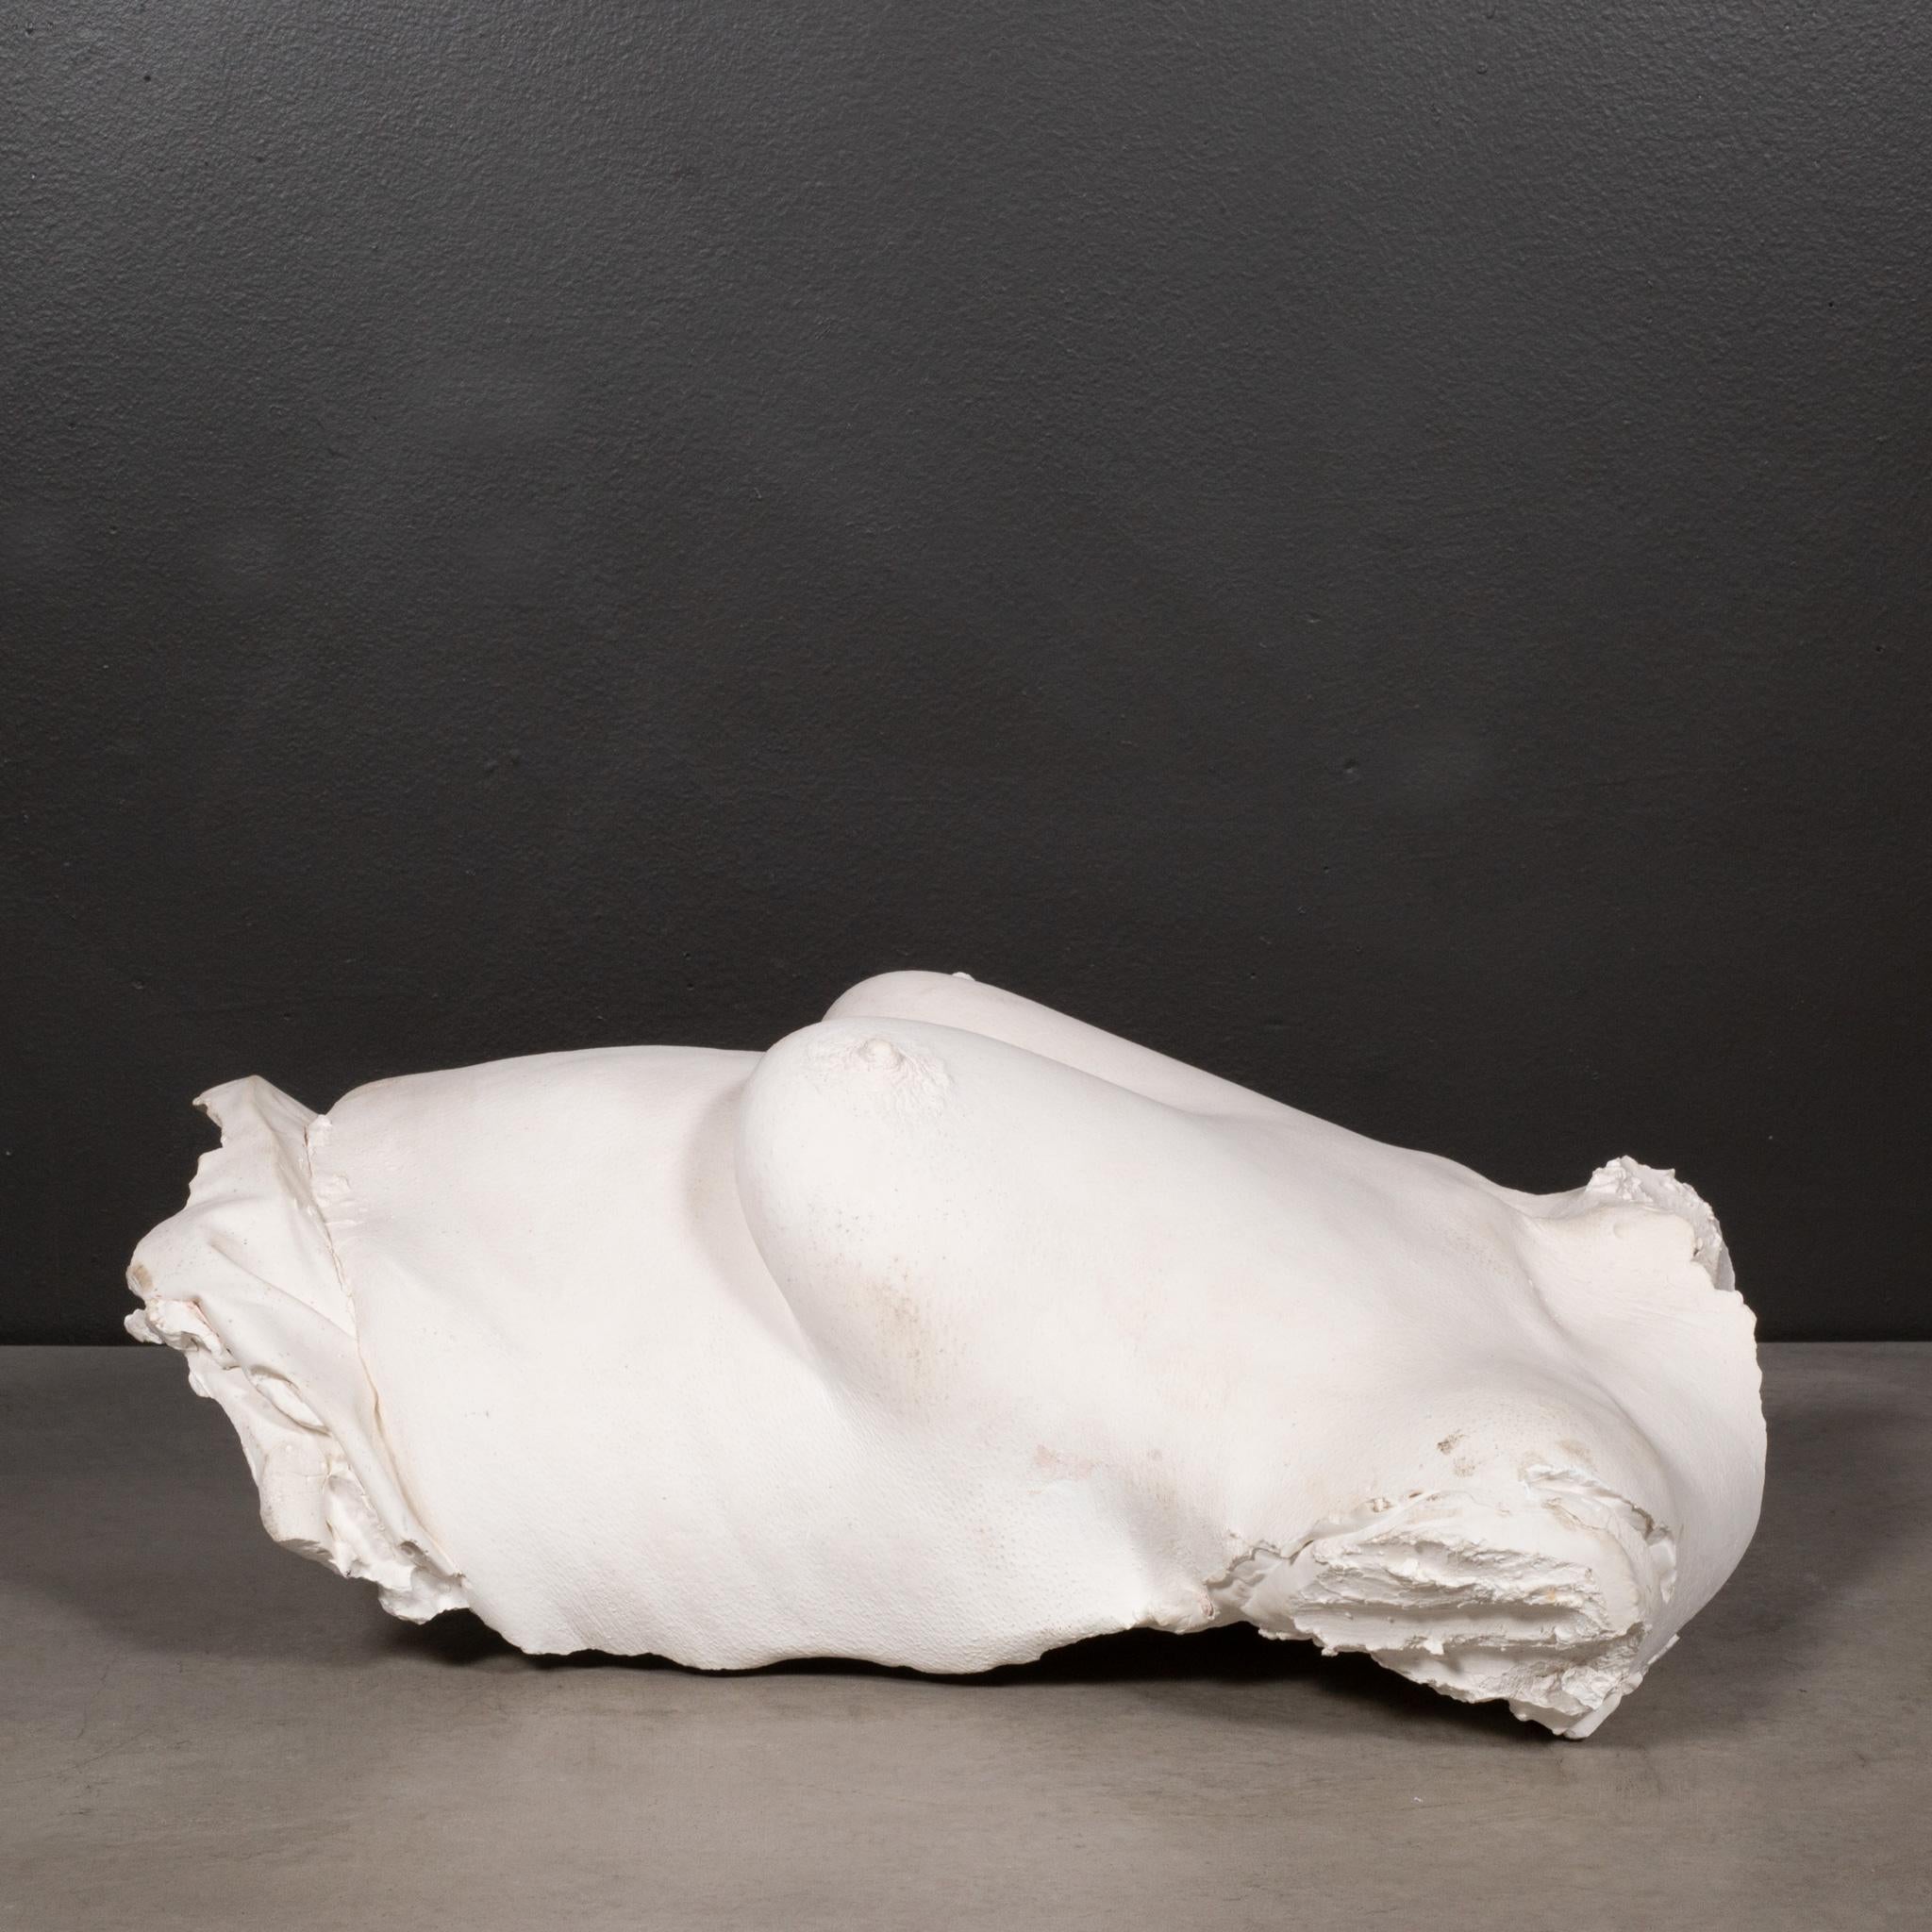 Christopher Tucker Plaster Cast Wall Sculpture of a Woman's Torso C.1950 In Good Condition For Sale In San Francisco, CA